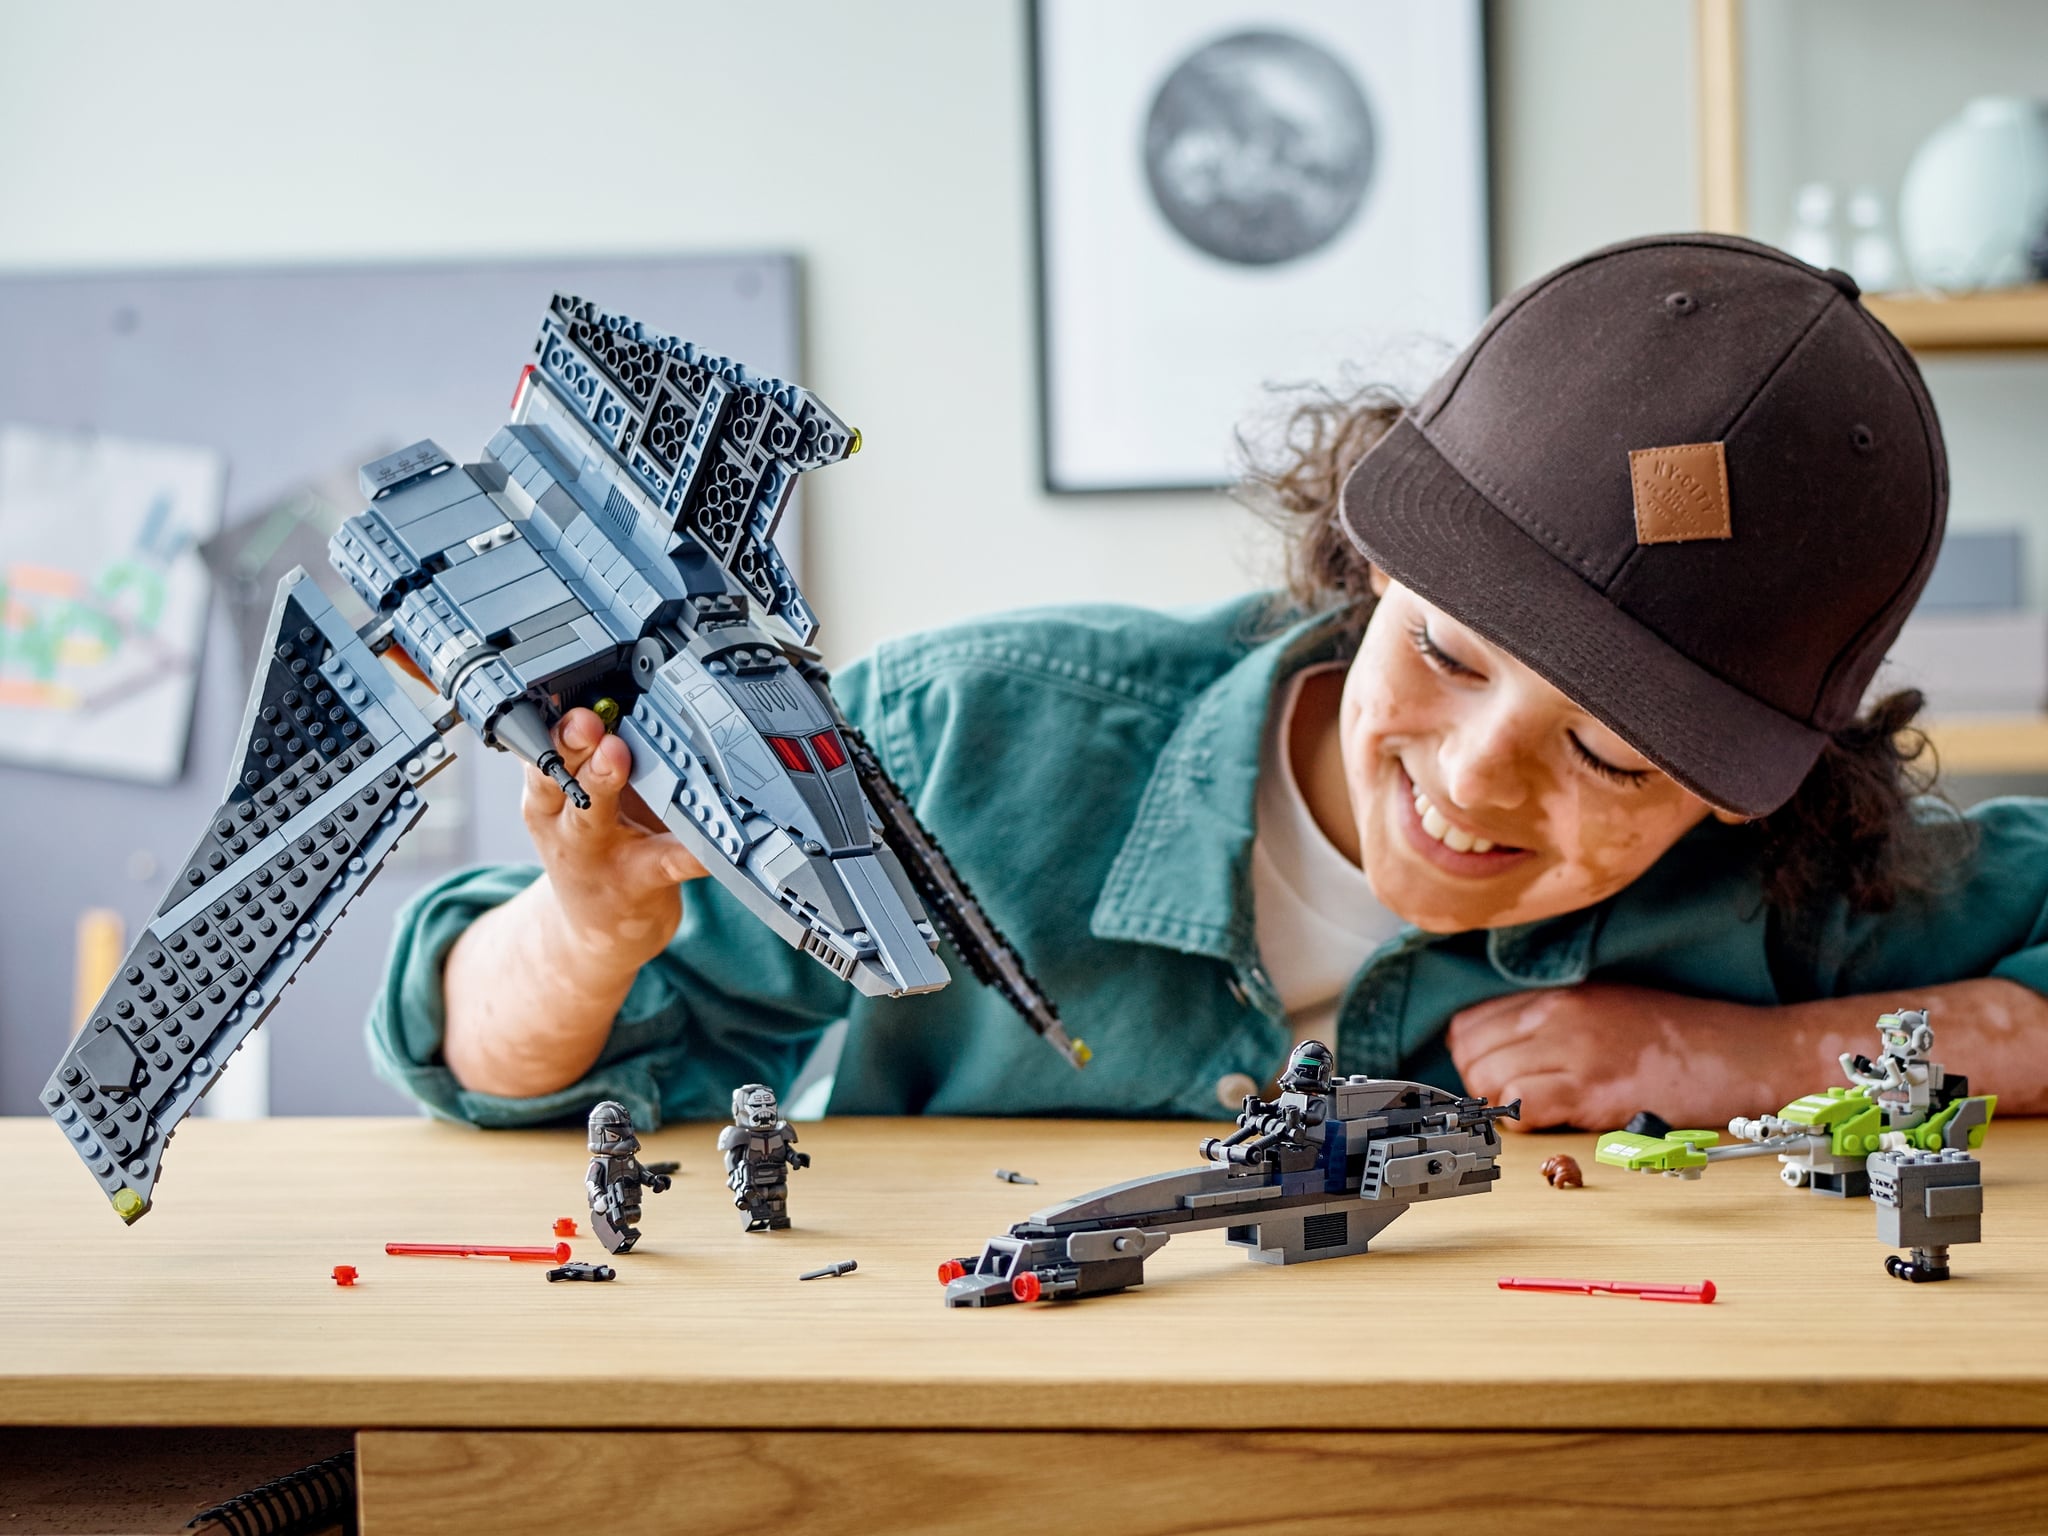 Here are the best Star Wars Lego sets for 2022